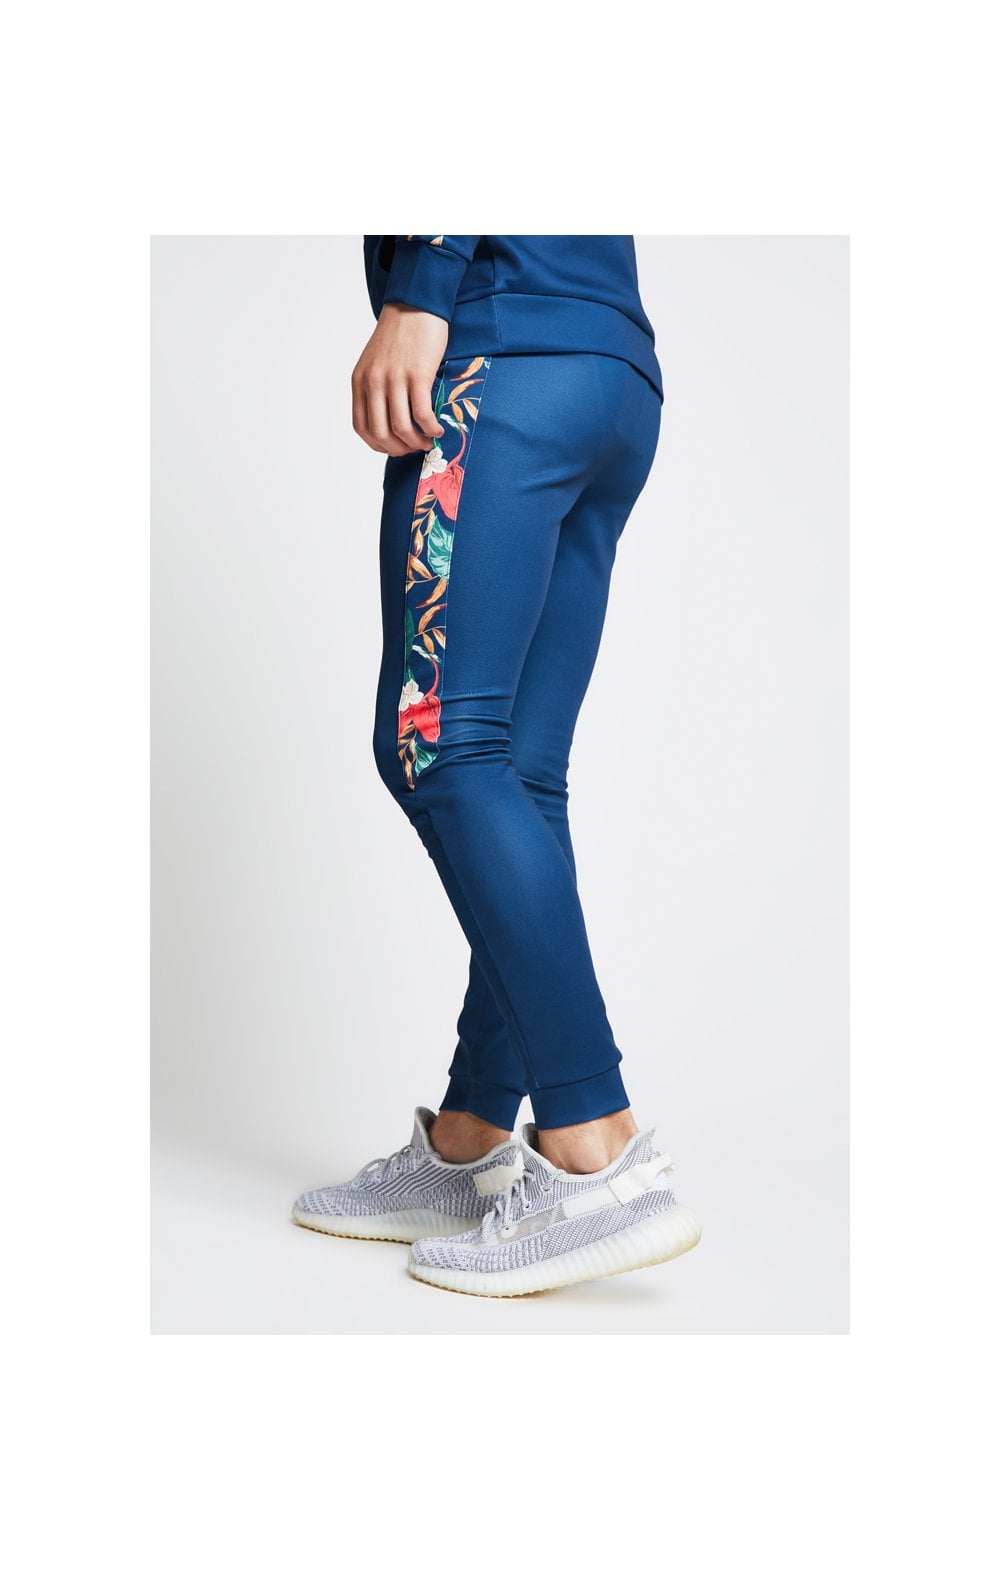 Illusive London Tape Panelled Joggers – Teal & Tropical Leaf (1)